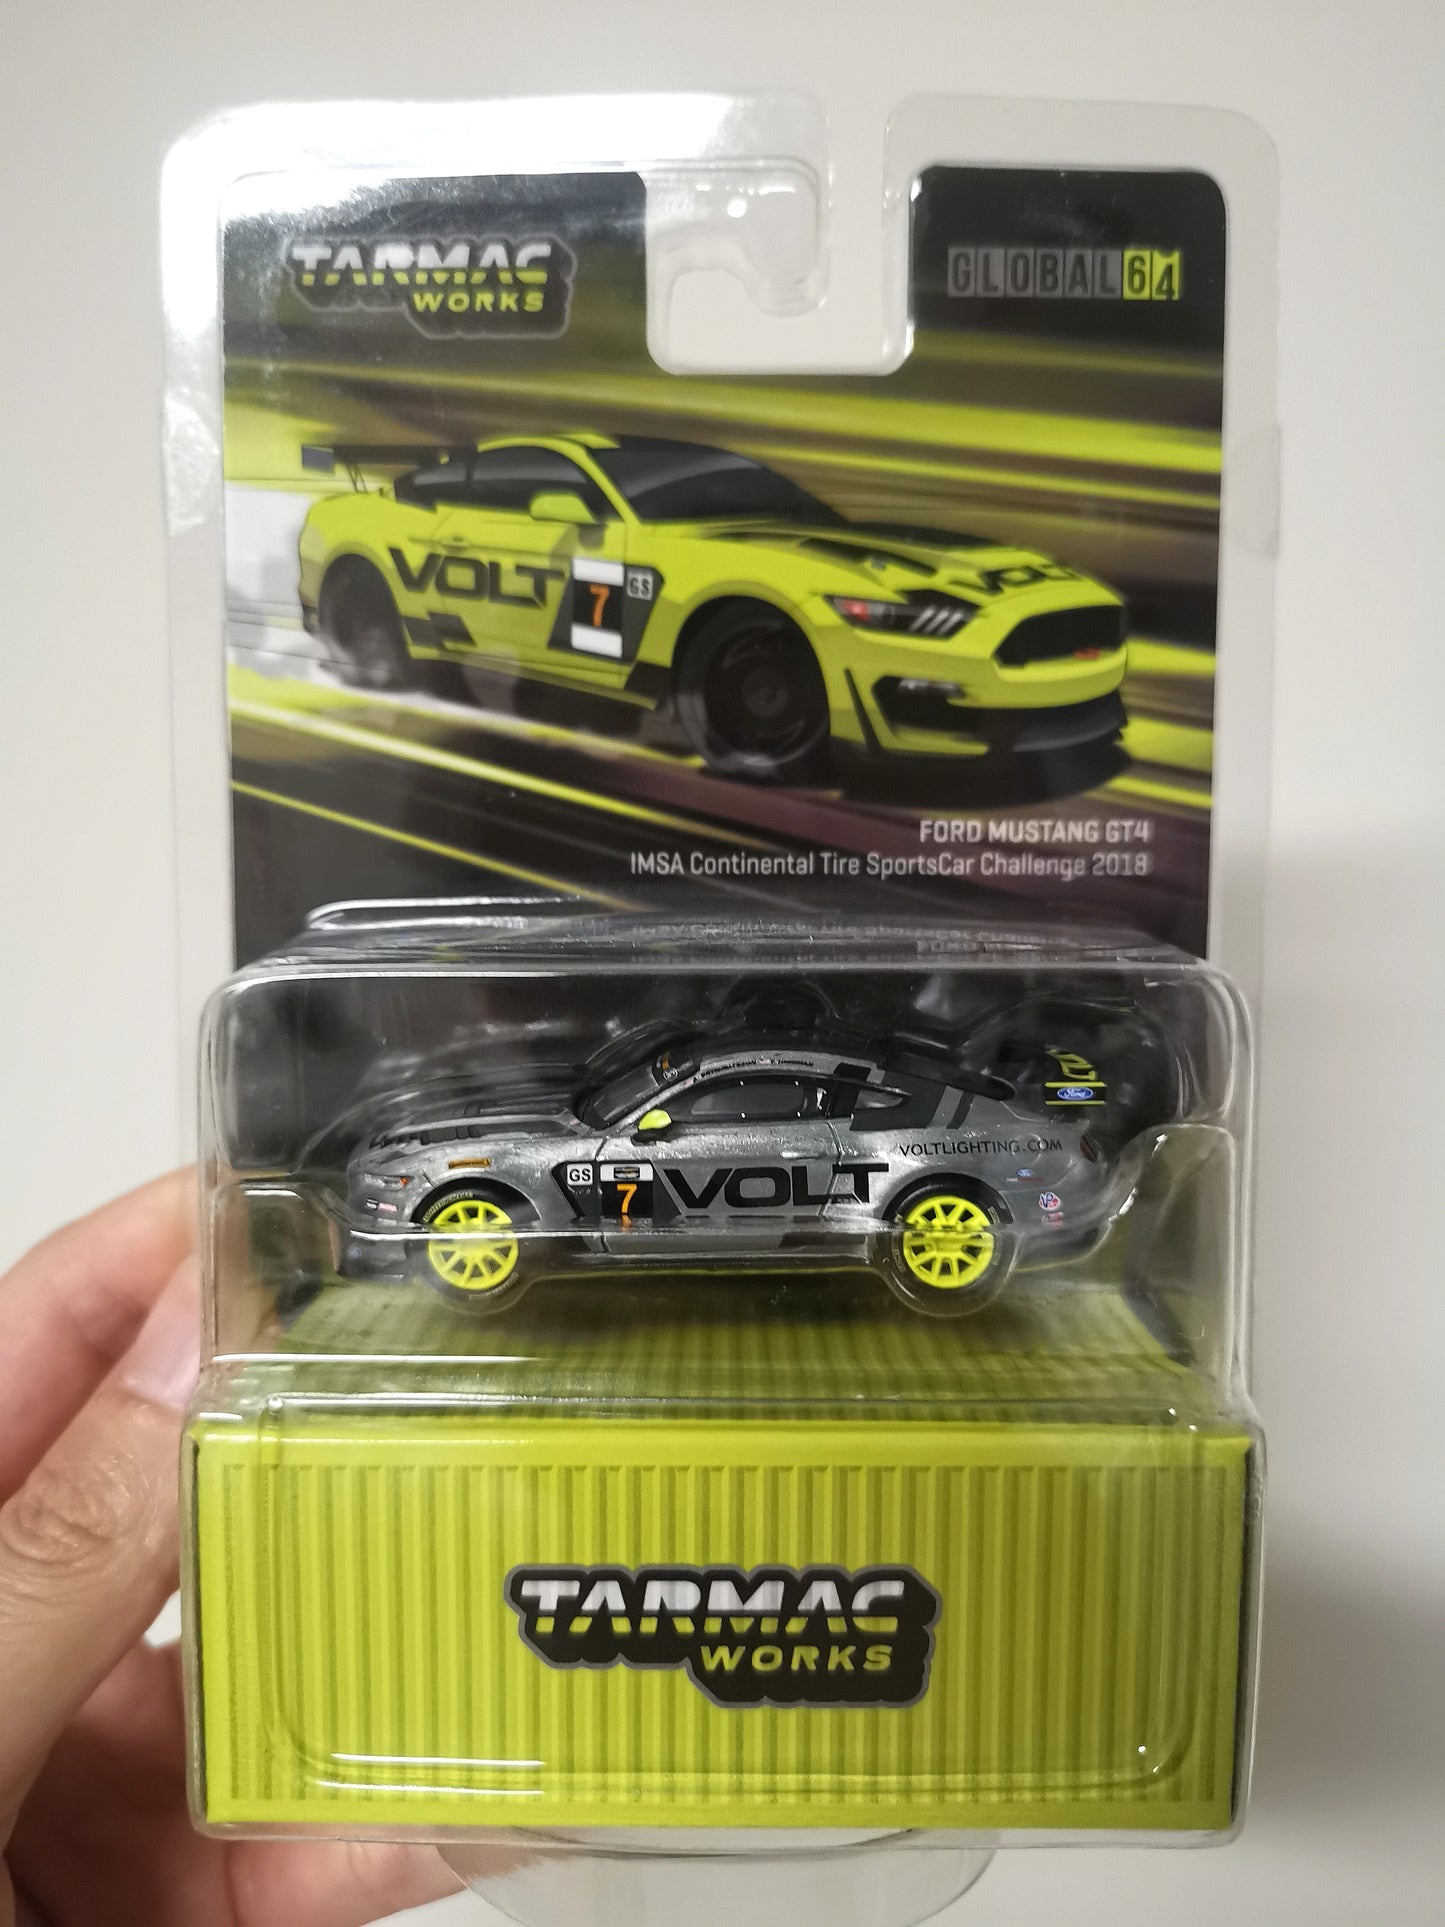 Tarmac Works Ford Mustang GT4 IMSA Continental Tire Sports Car Challenge 2018